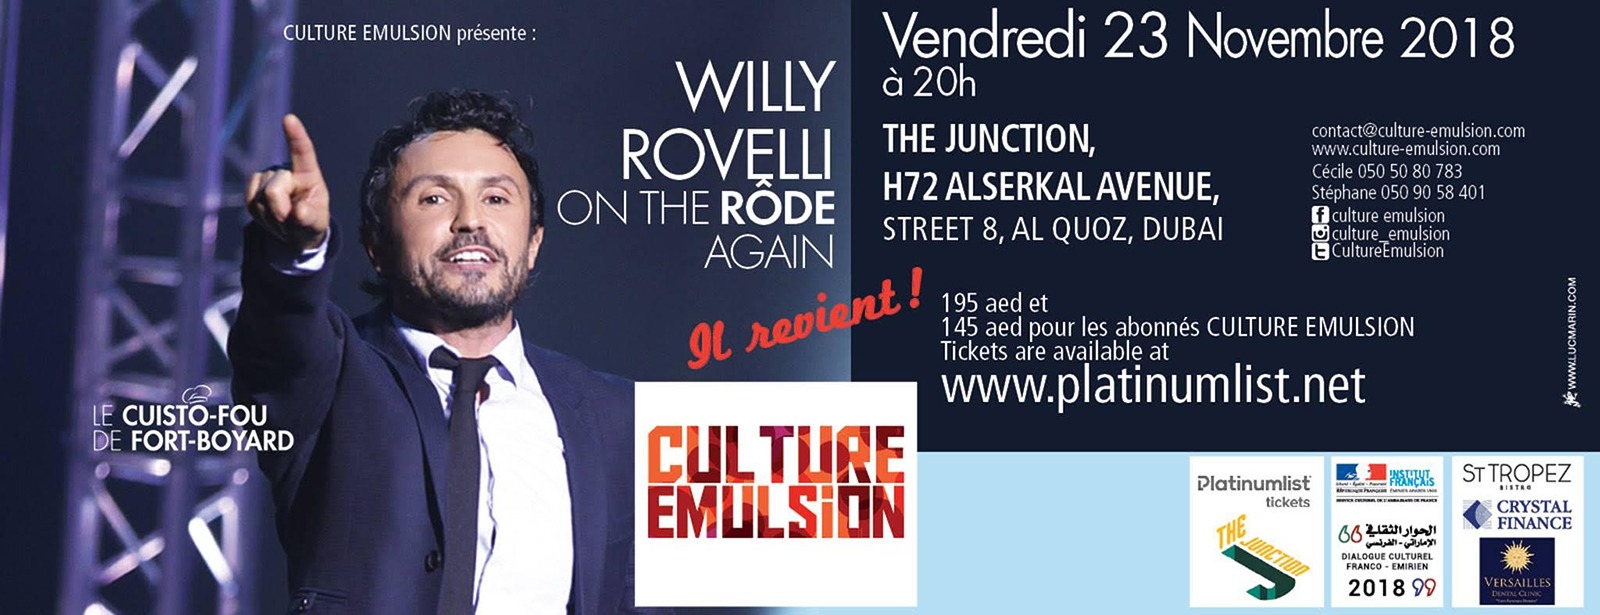 Willy Rovelli — Enjoying a one-man-show - Coming Soon in UAE